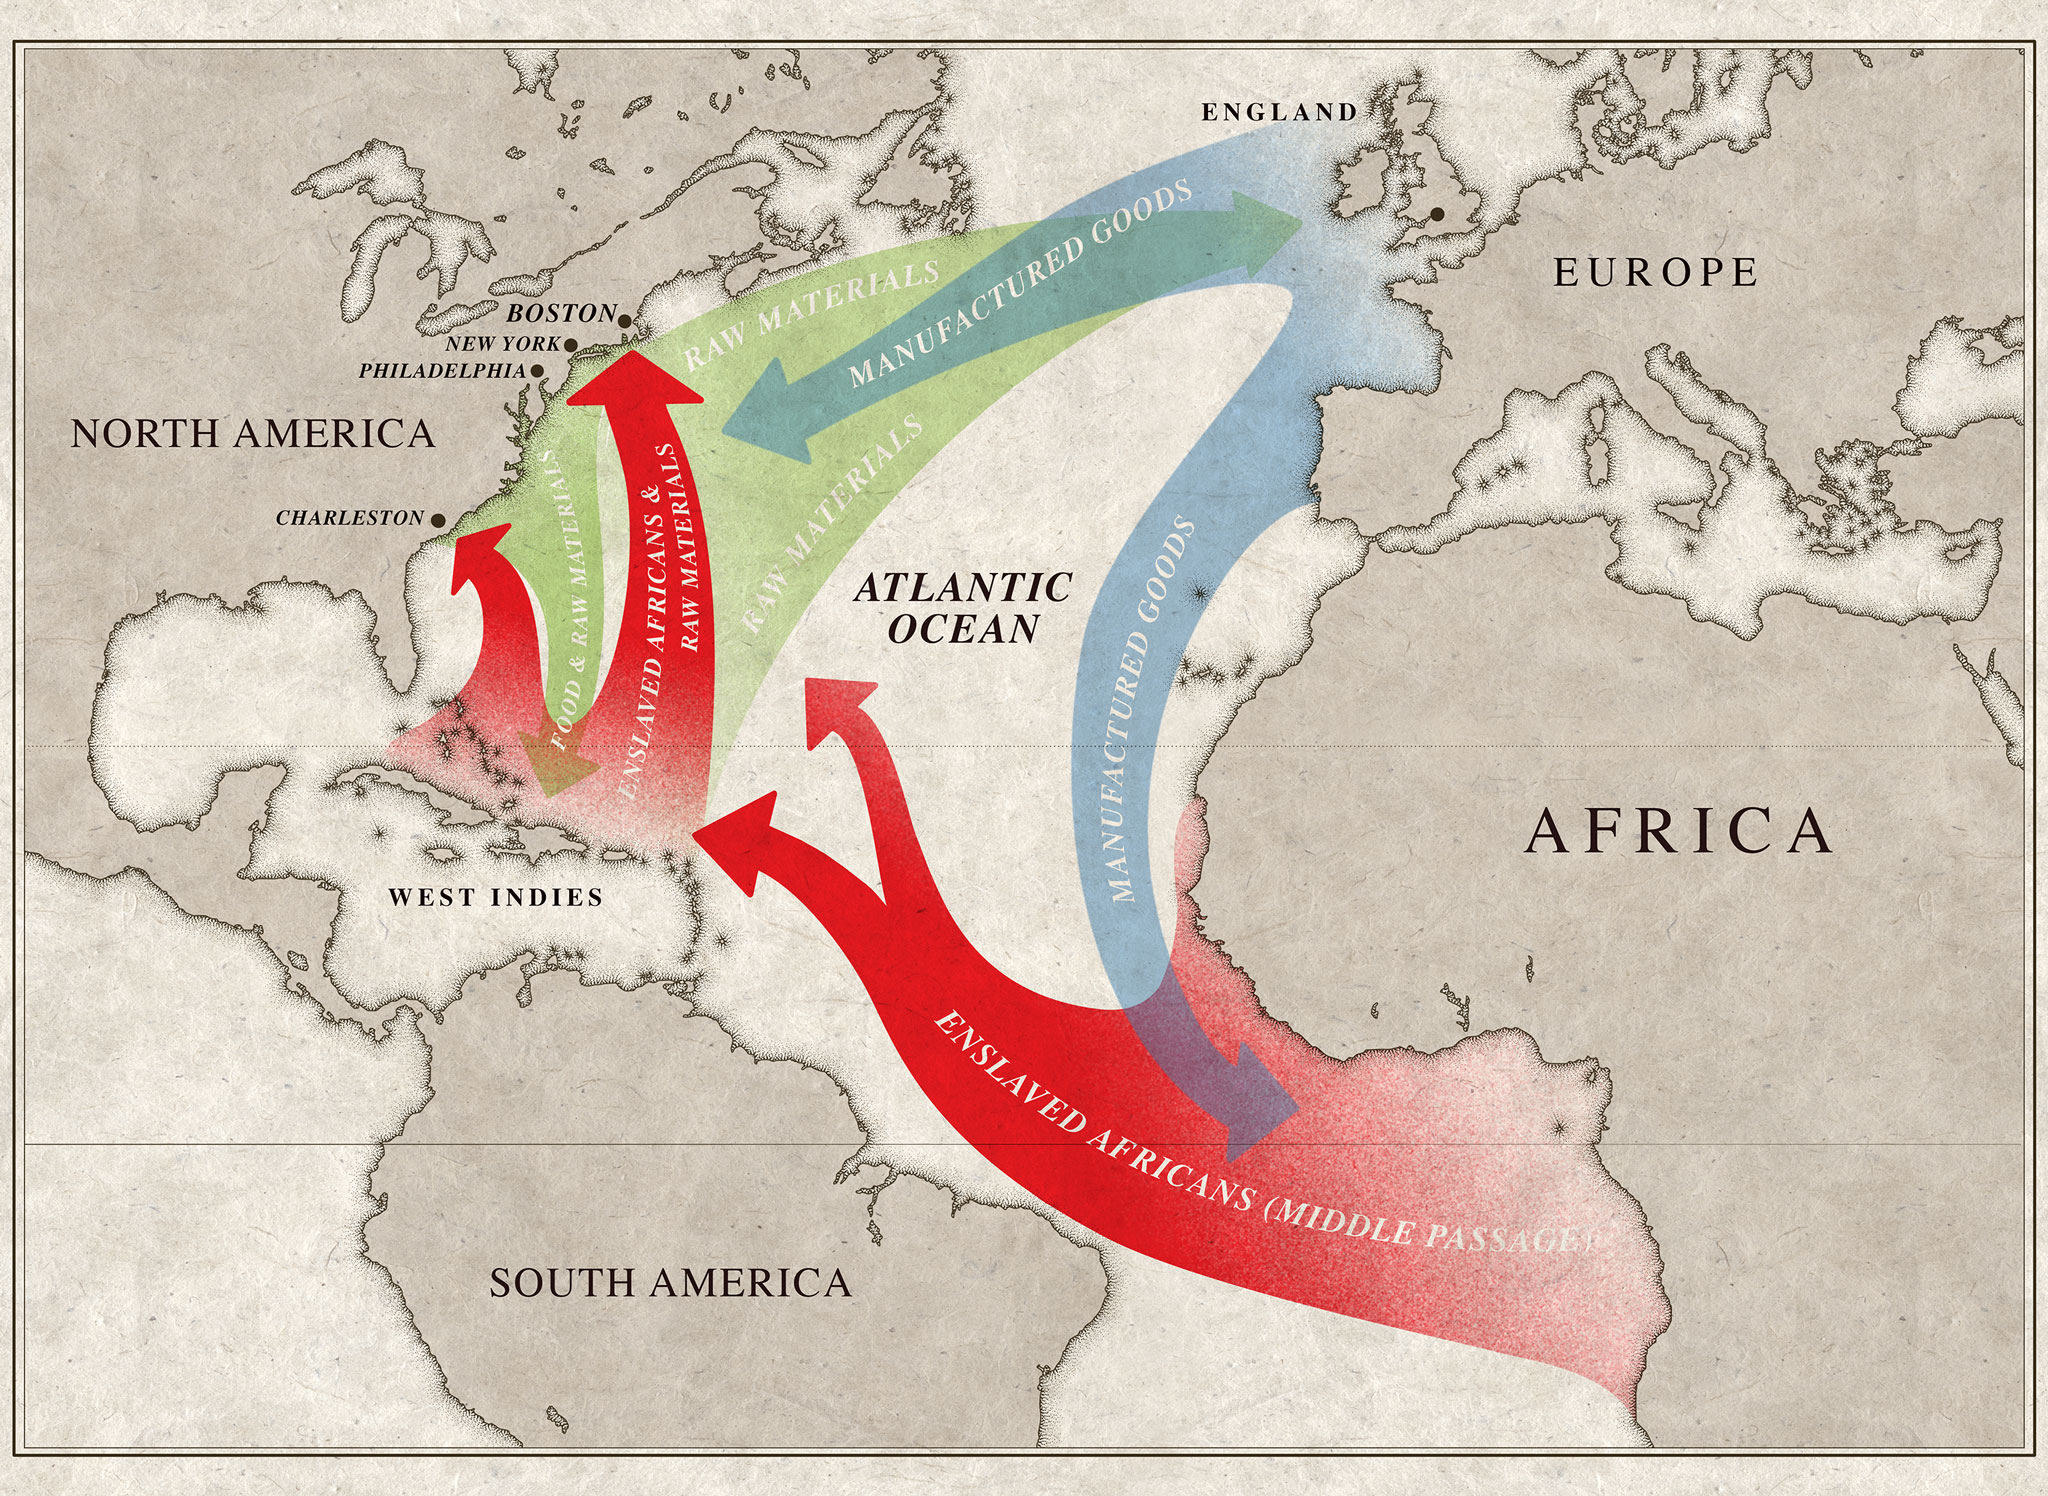 many died during the middle passage the voyage across the